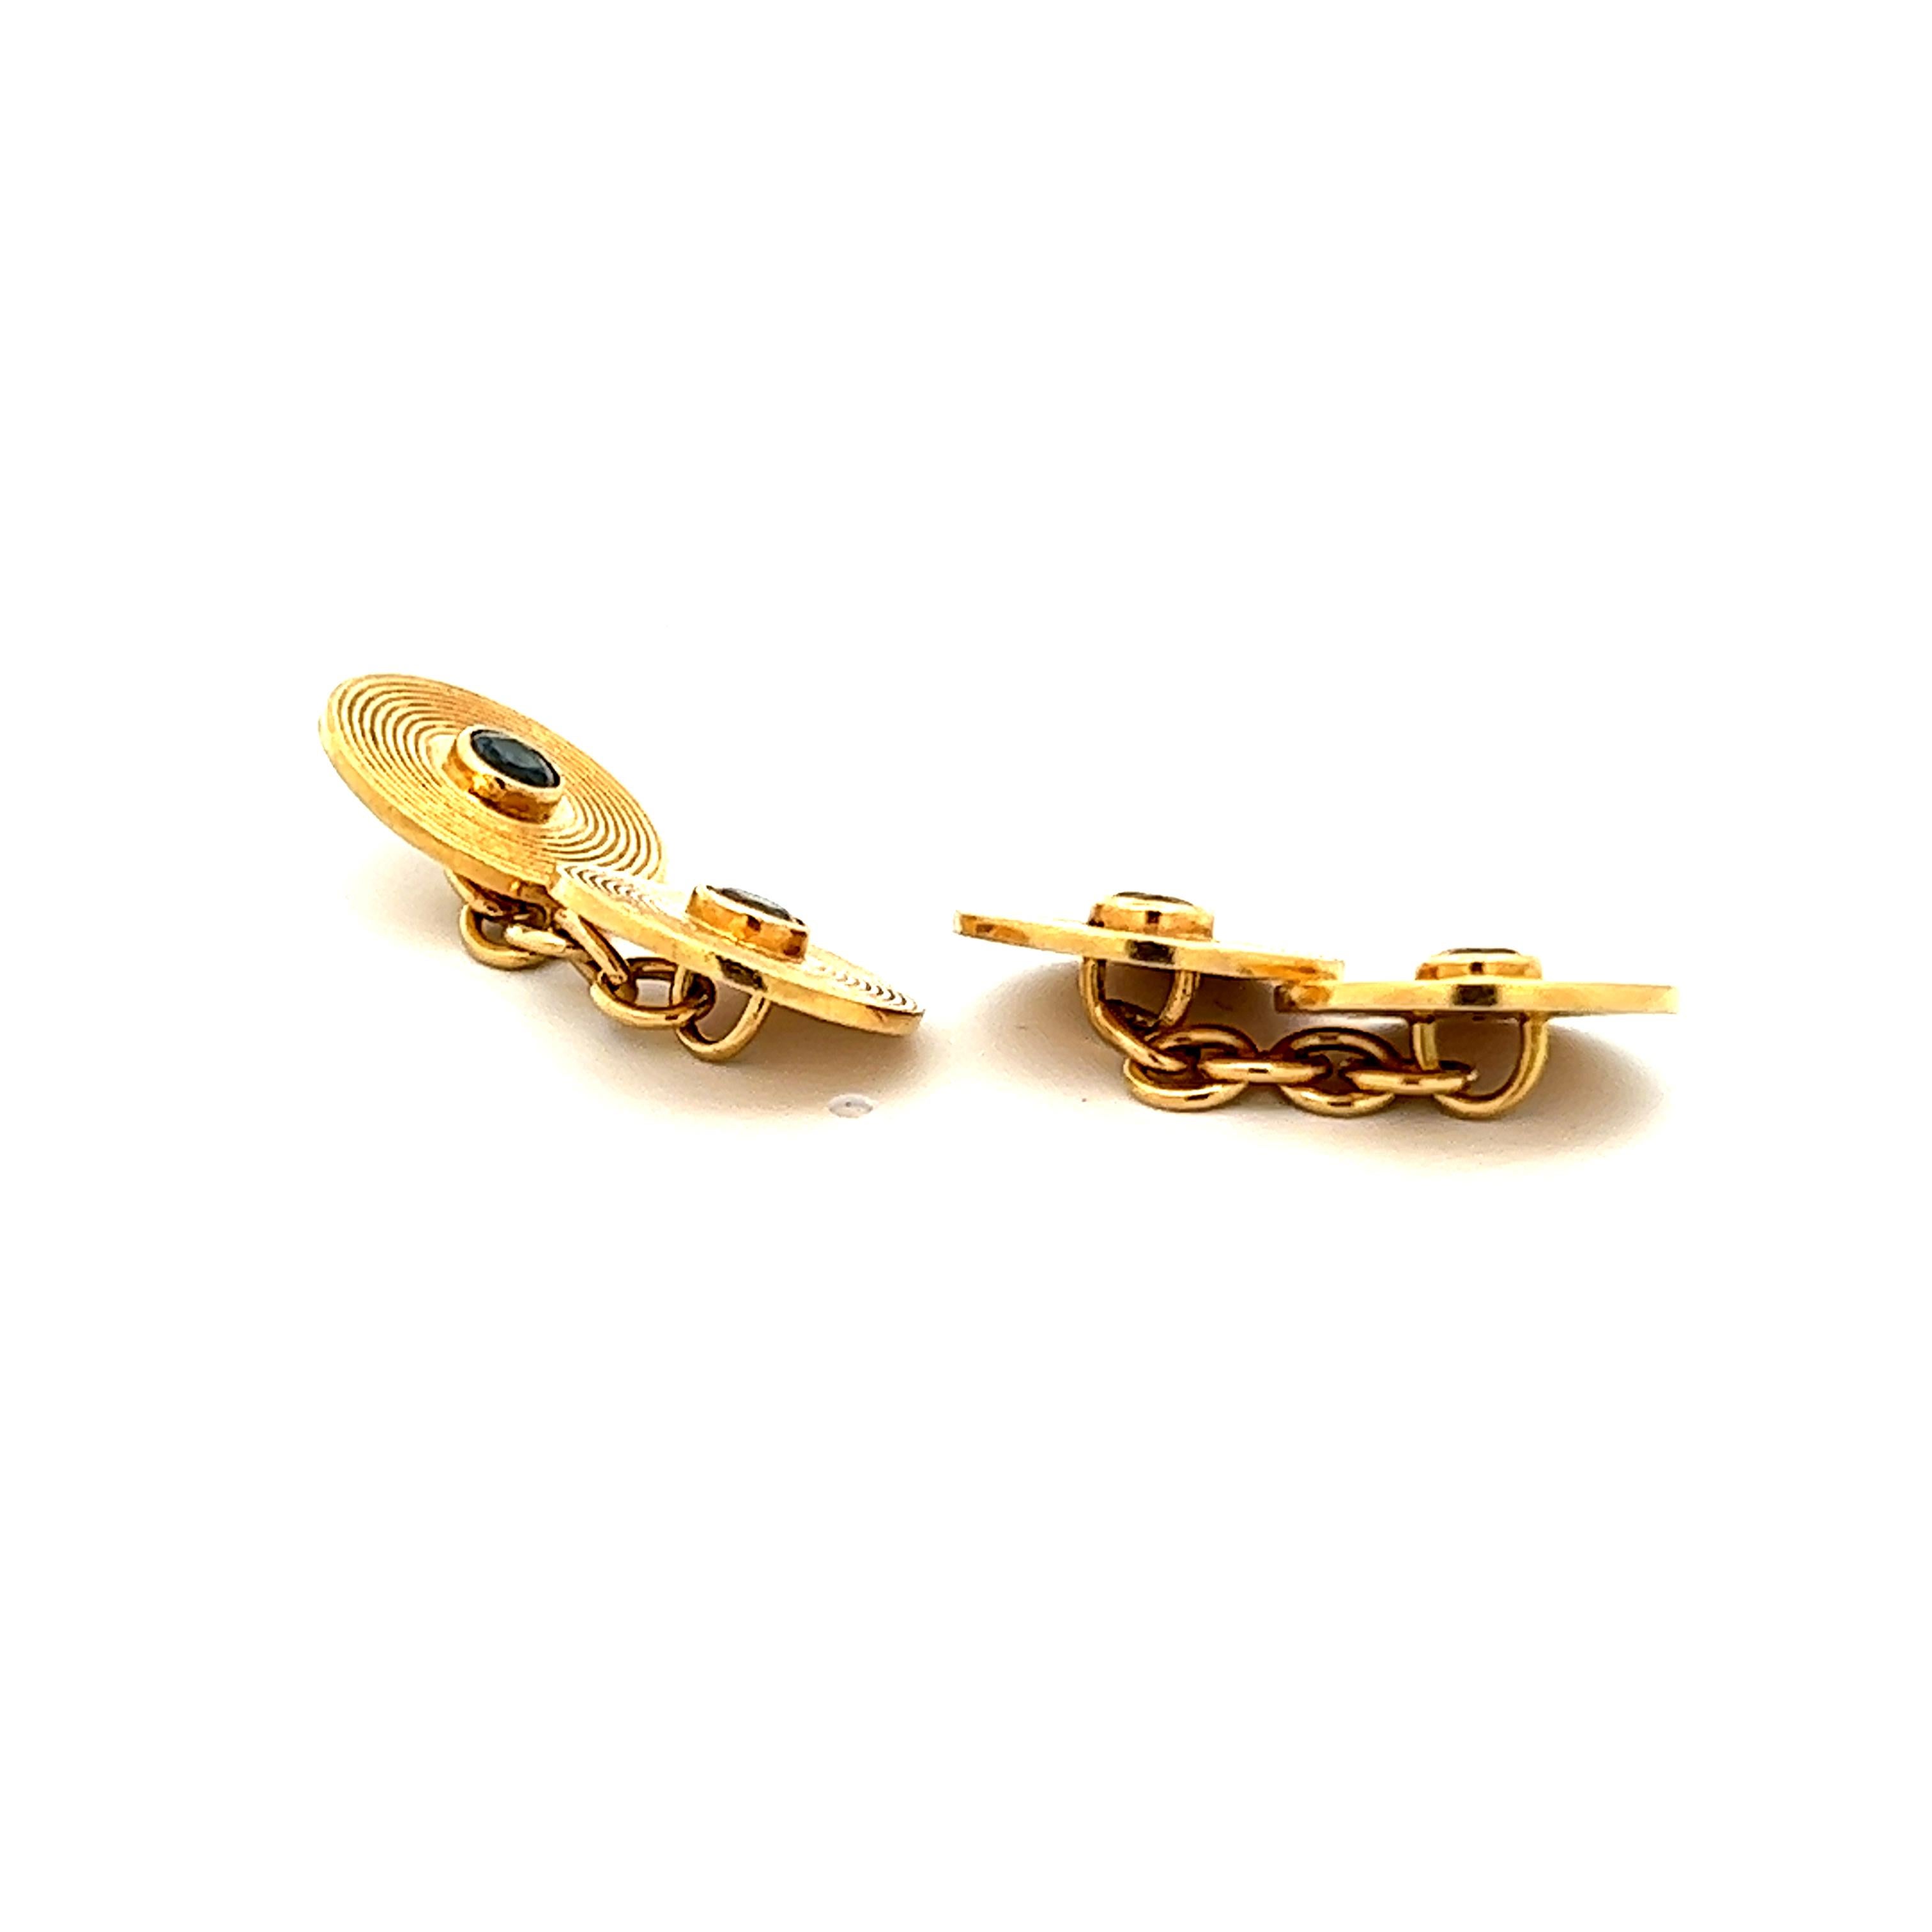 1950s Yellow Gold French Cartier Sapphire Cufflinks Signed Cartier  In Excellent Condition For Sale In Lexington, KY